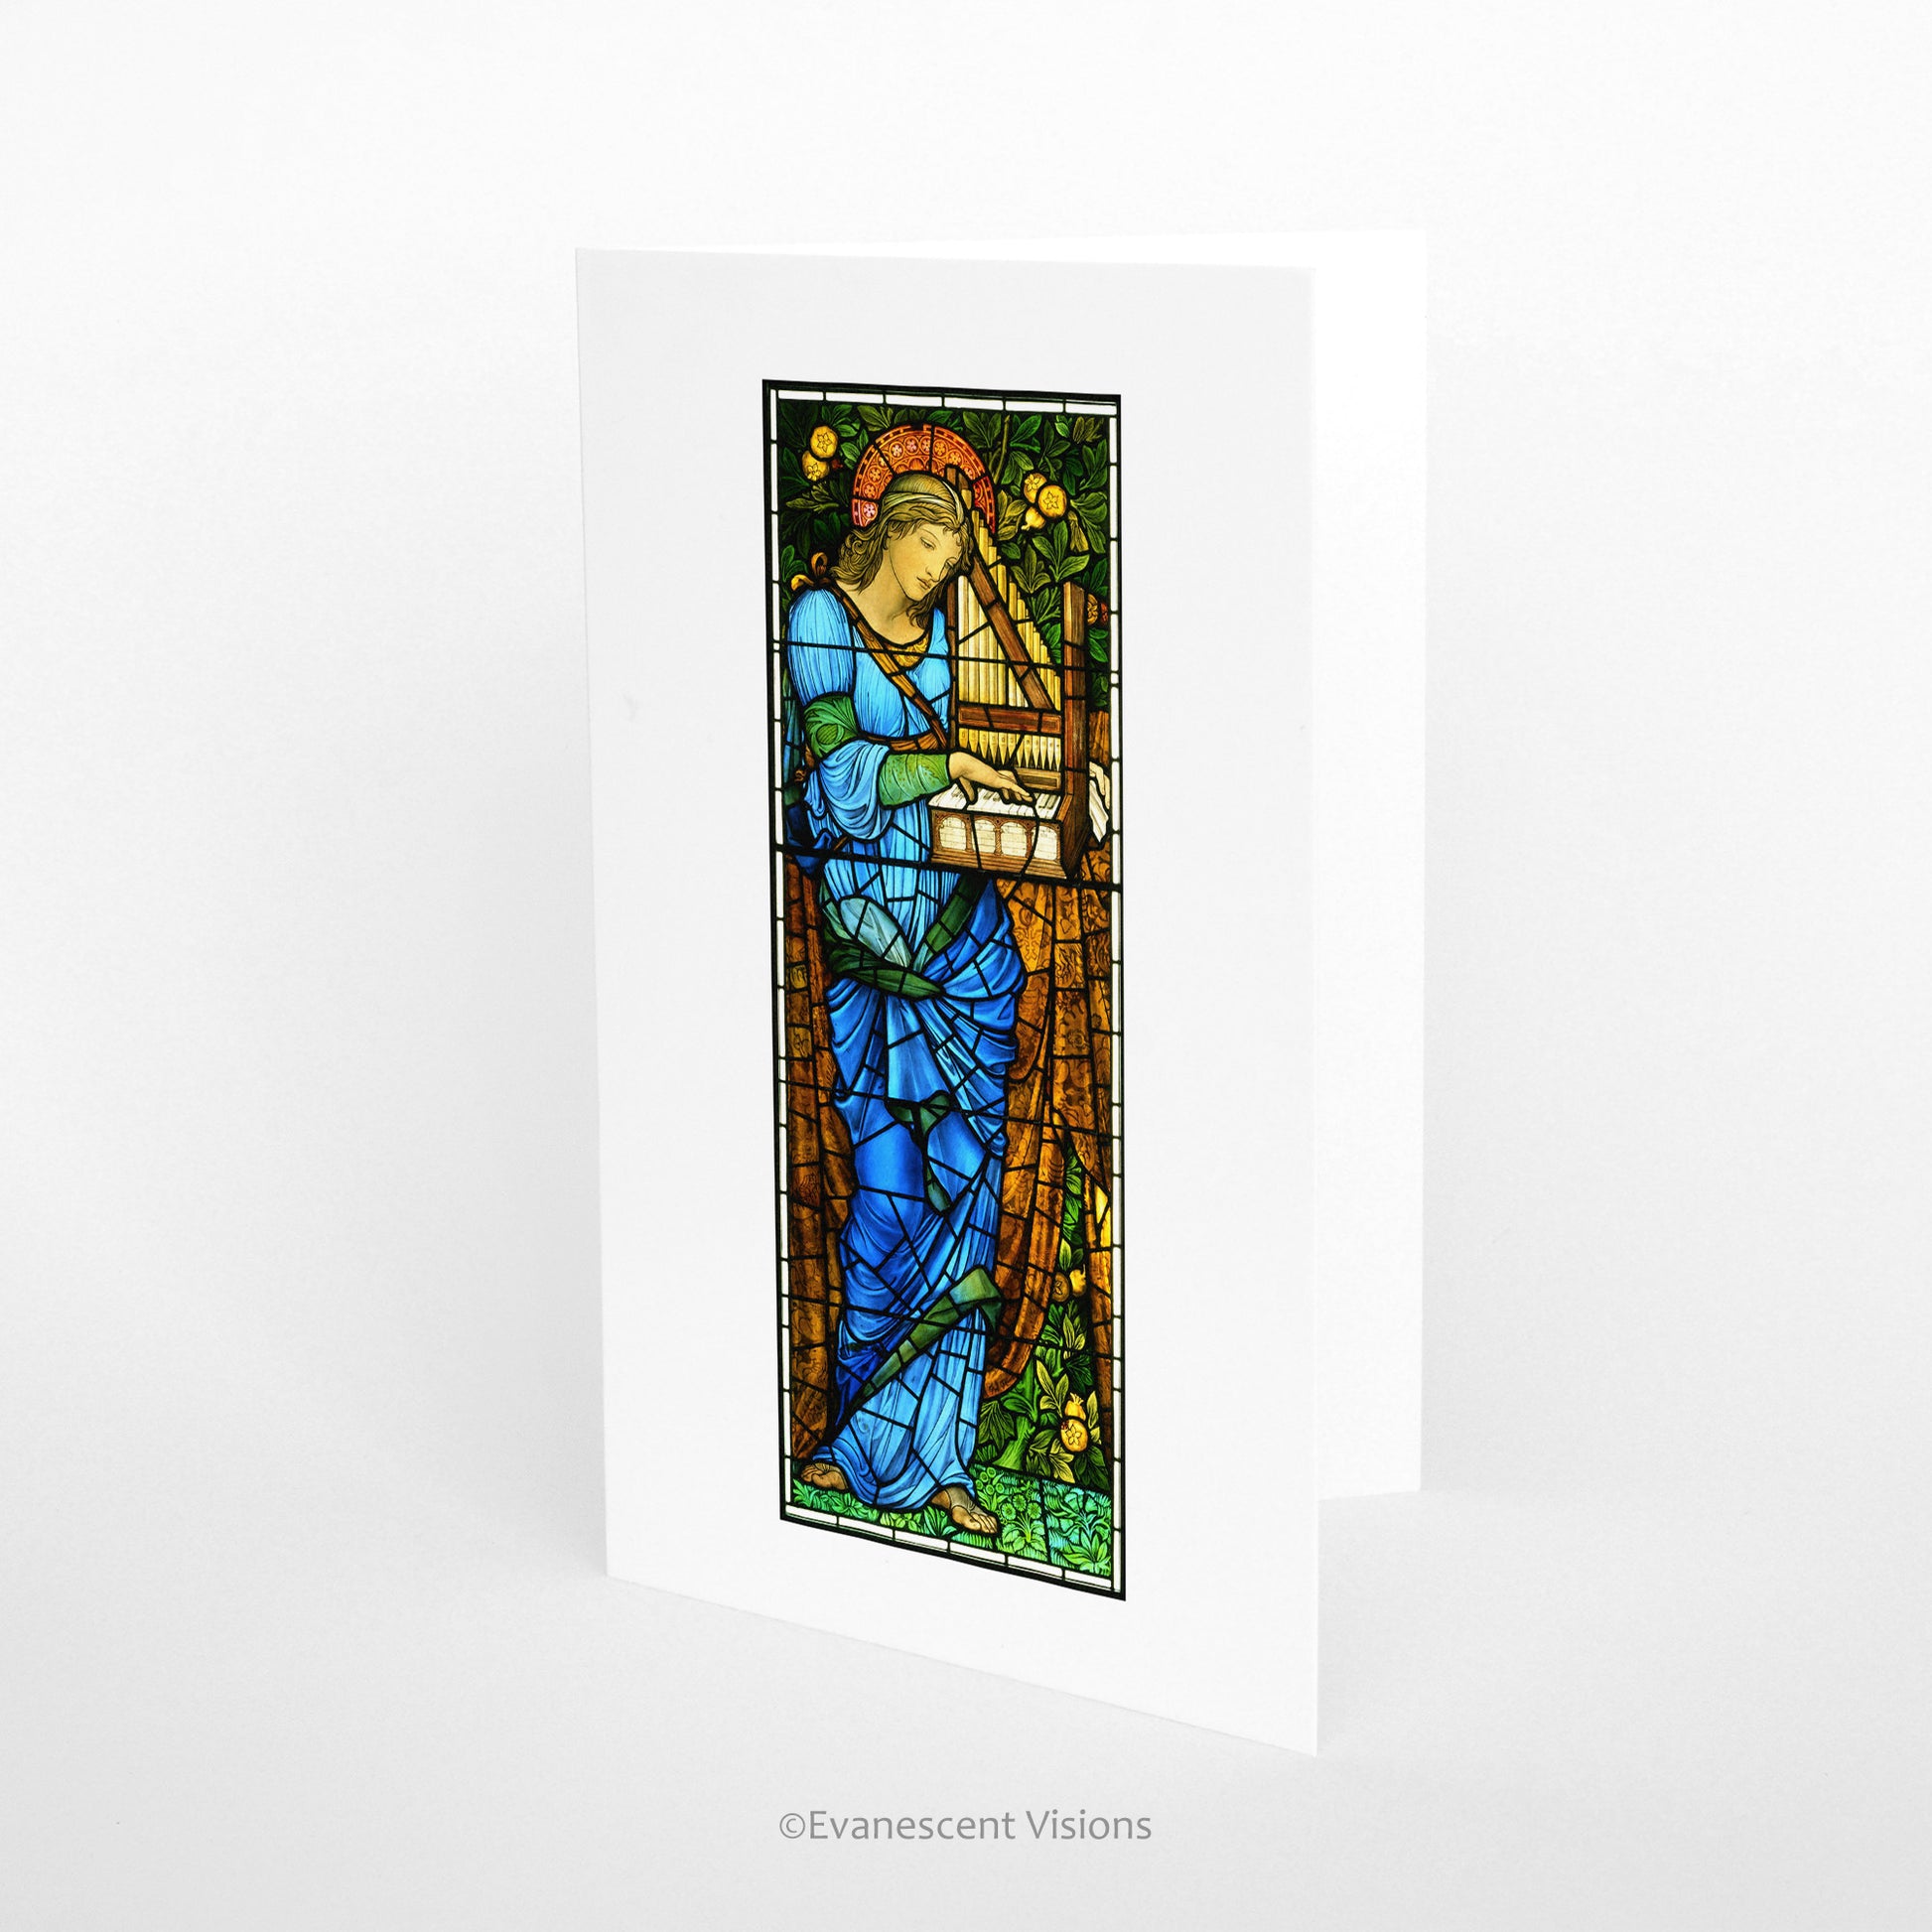 Burne-Jones Saint Cecilia Religious Greeting Card standing on a surface